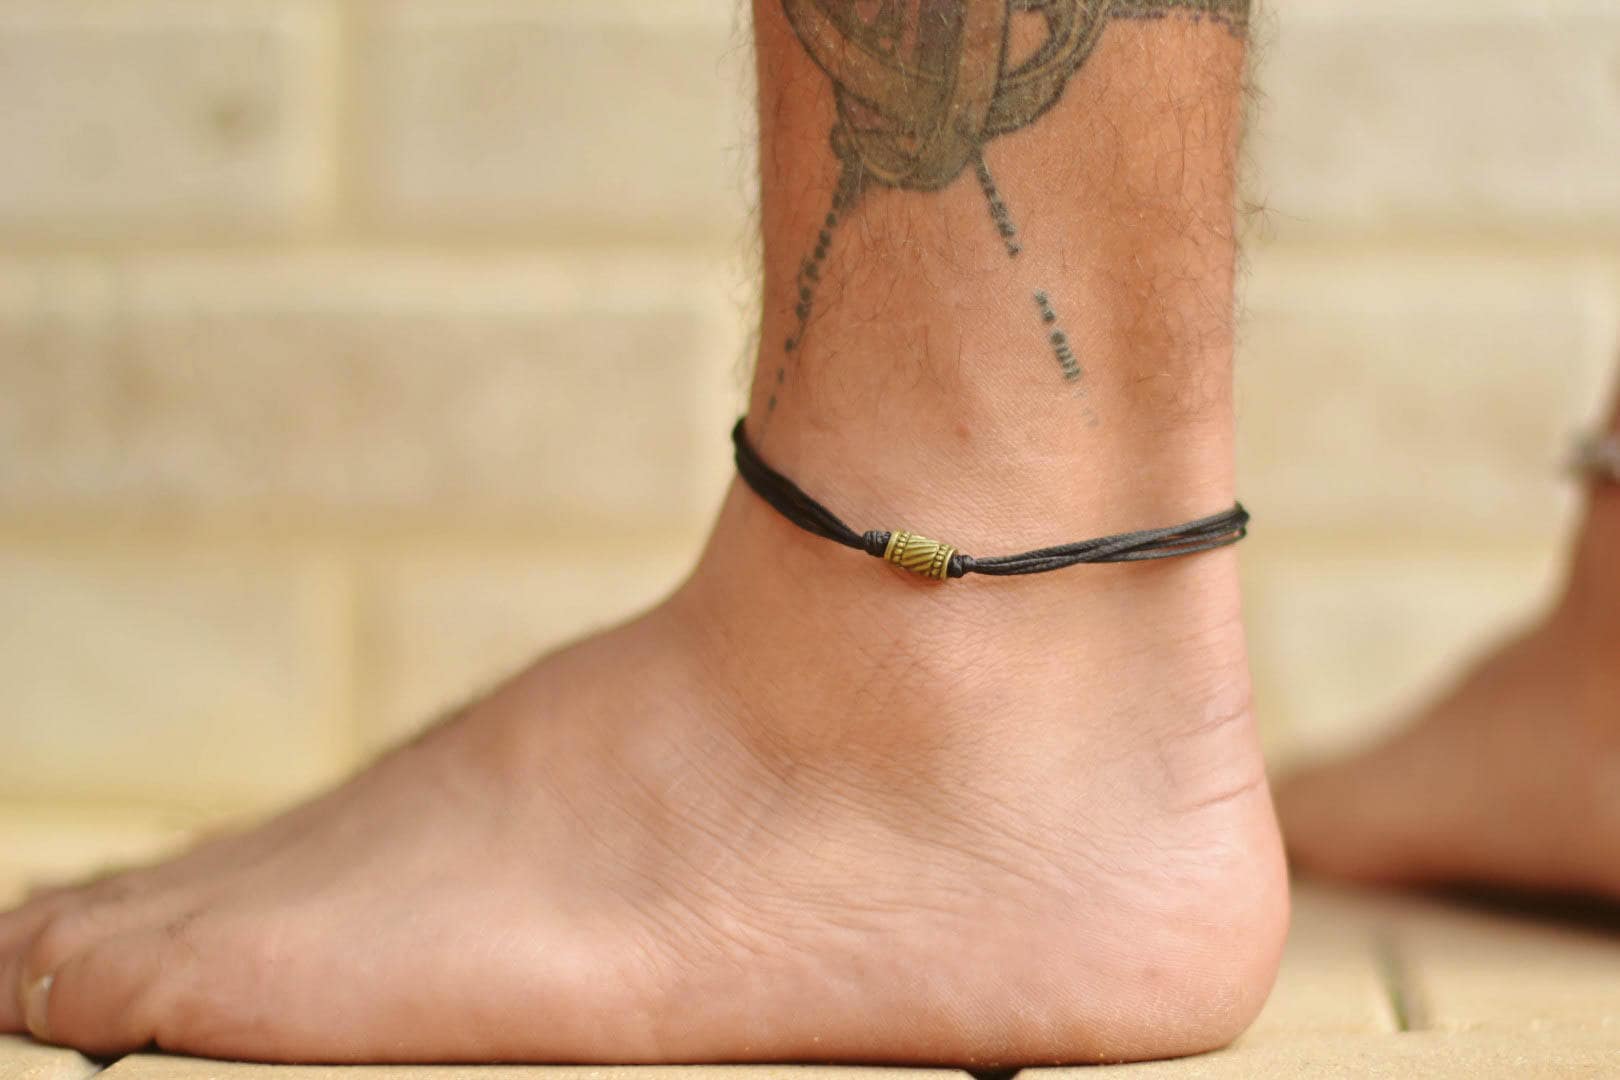 Bohemia Beads Chain Anklets Bracelets for Men, Black Handmade Braided Rope  Cord Surfer Anklet, Summer Holiday Beach Foot Jewelry - AliExpress